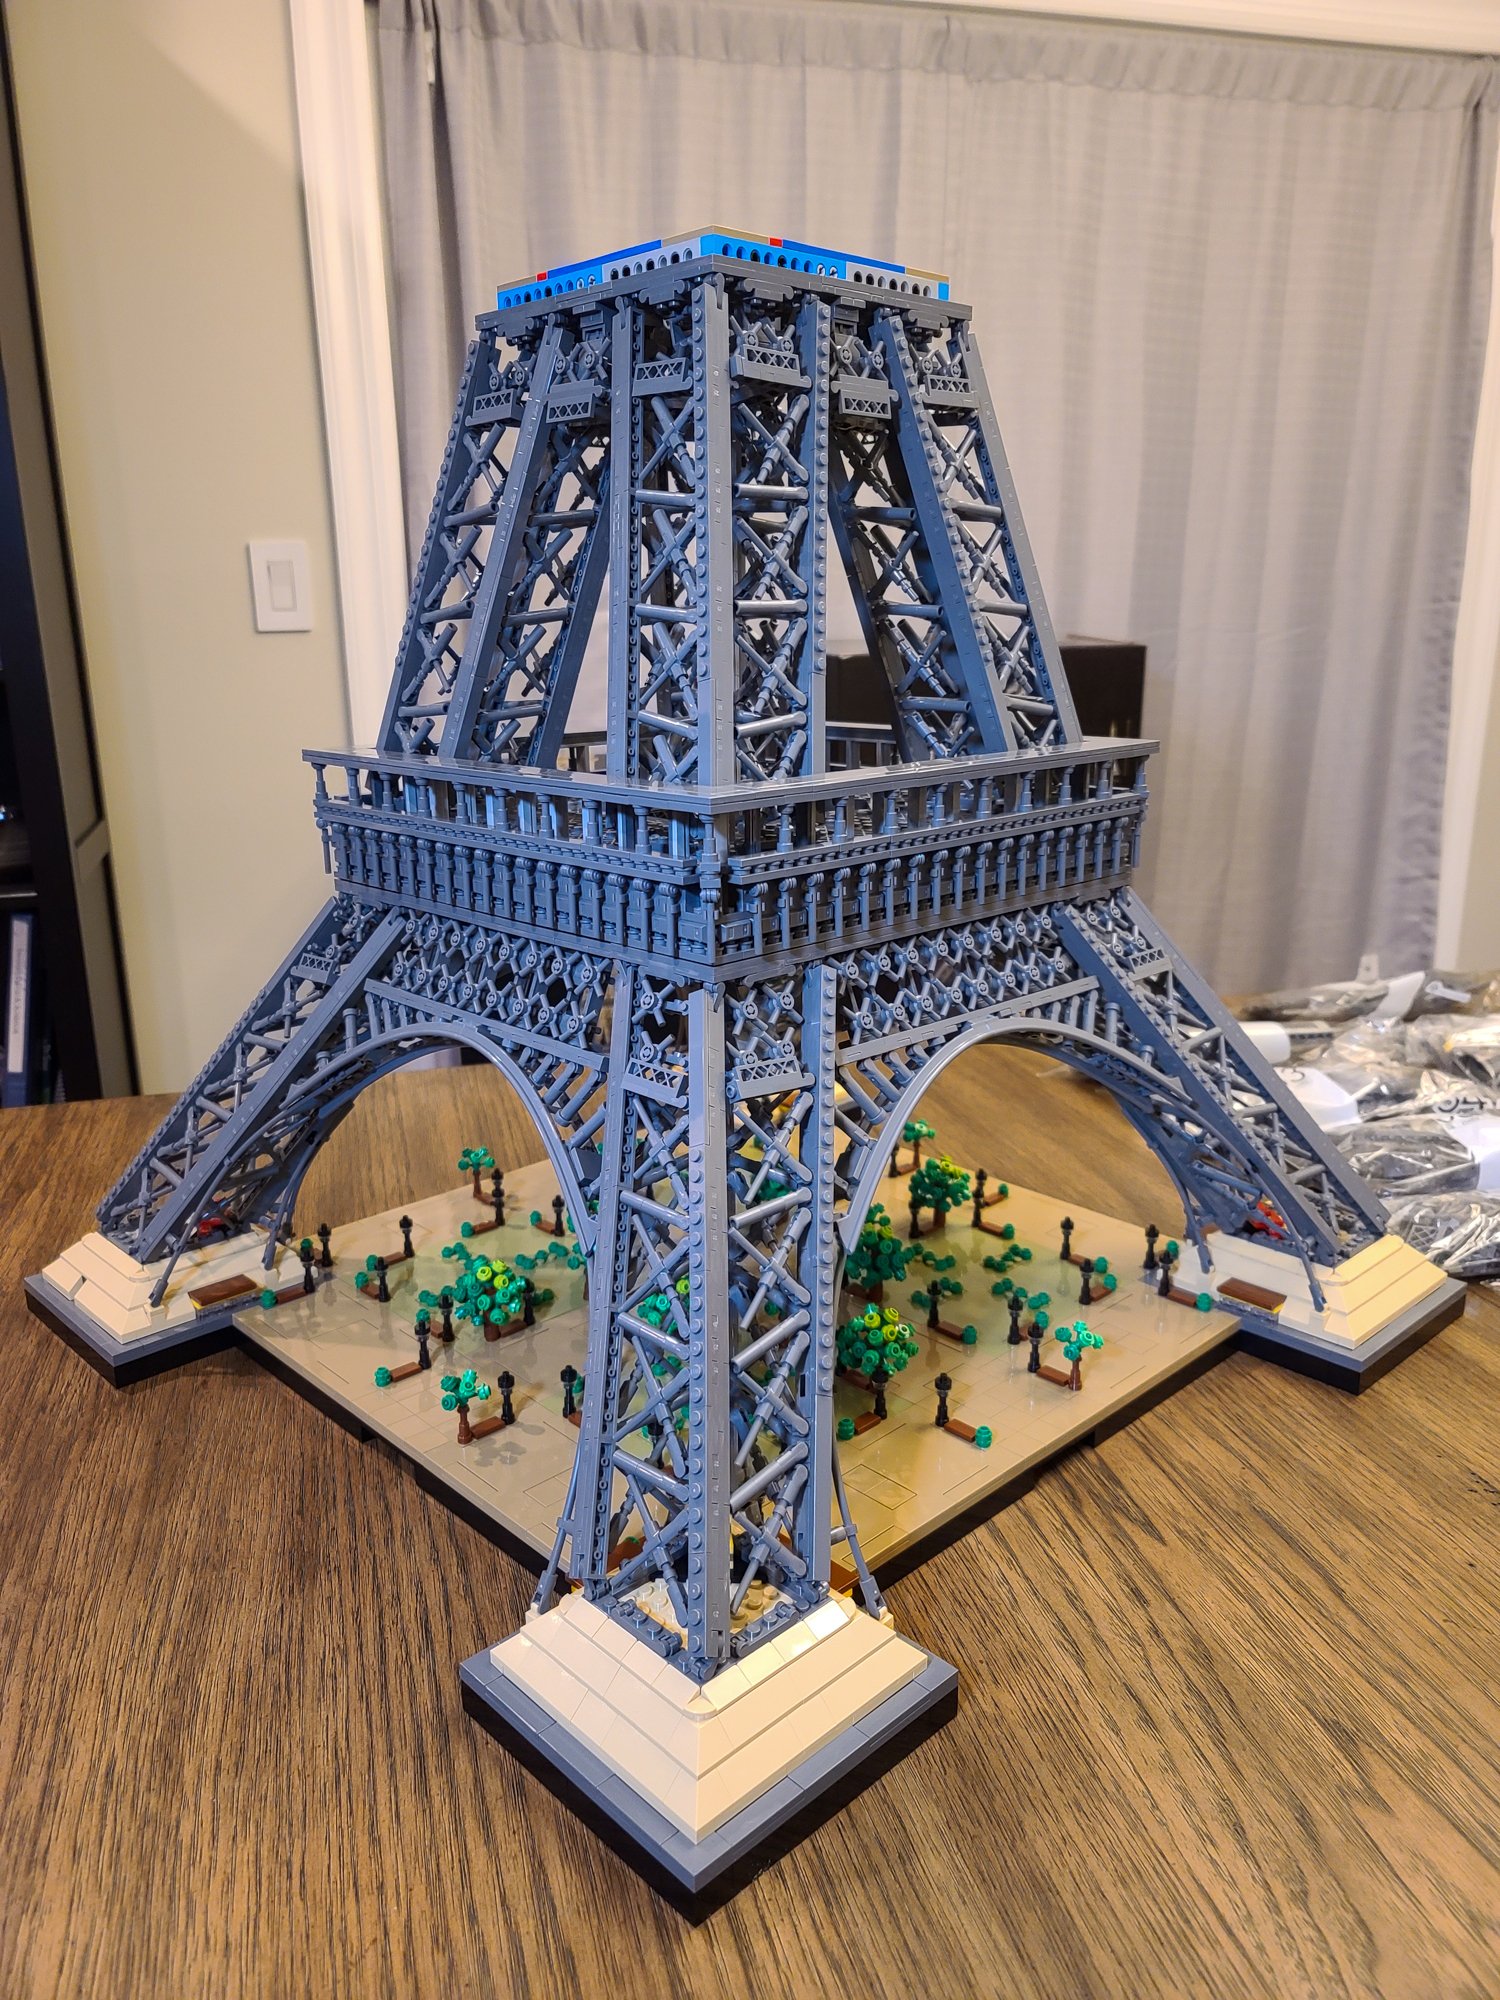 13 hours of building straight.